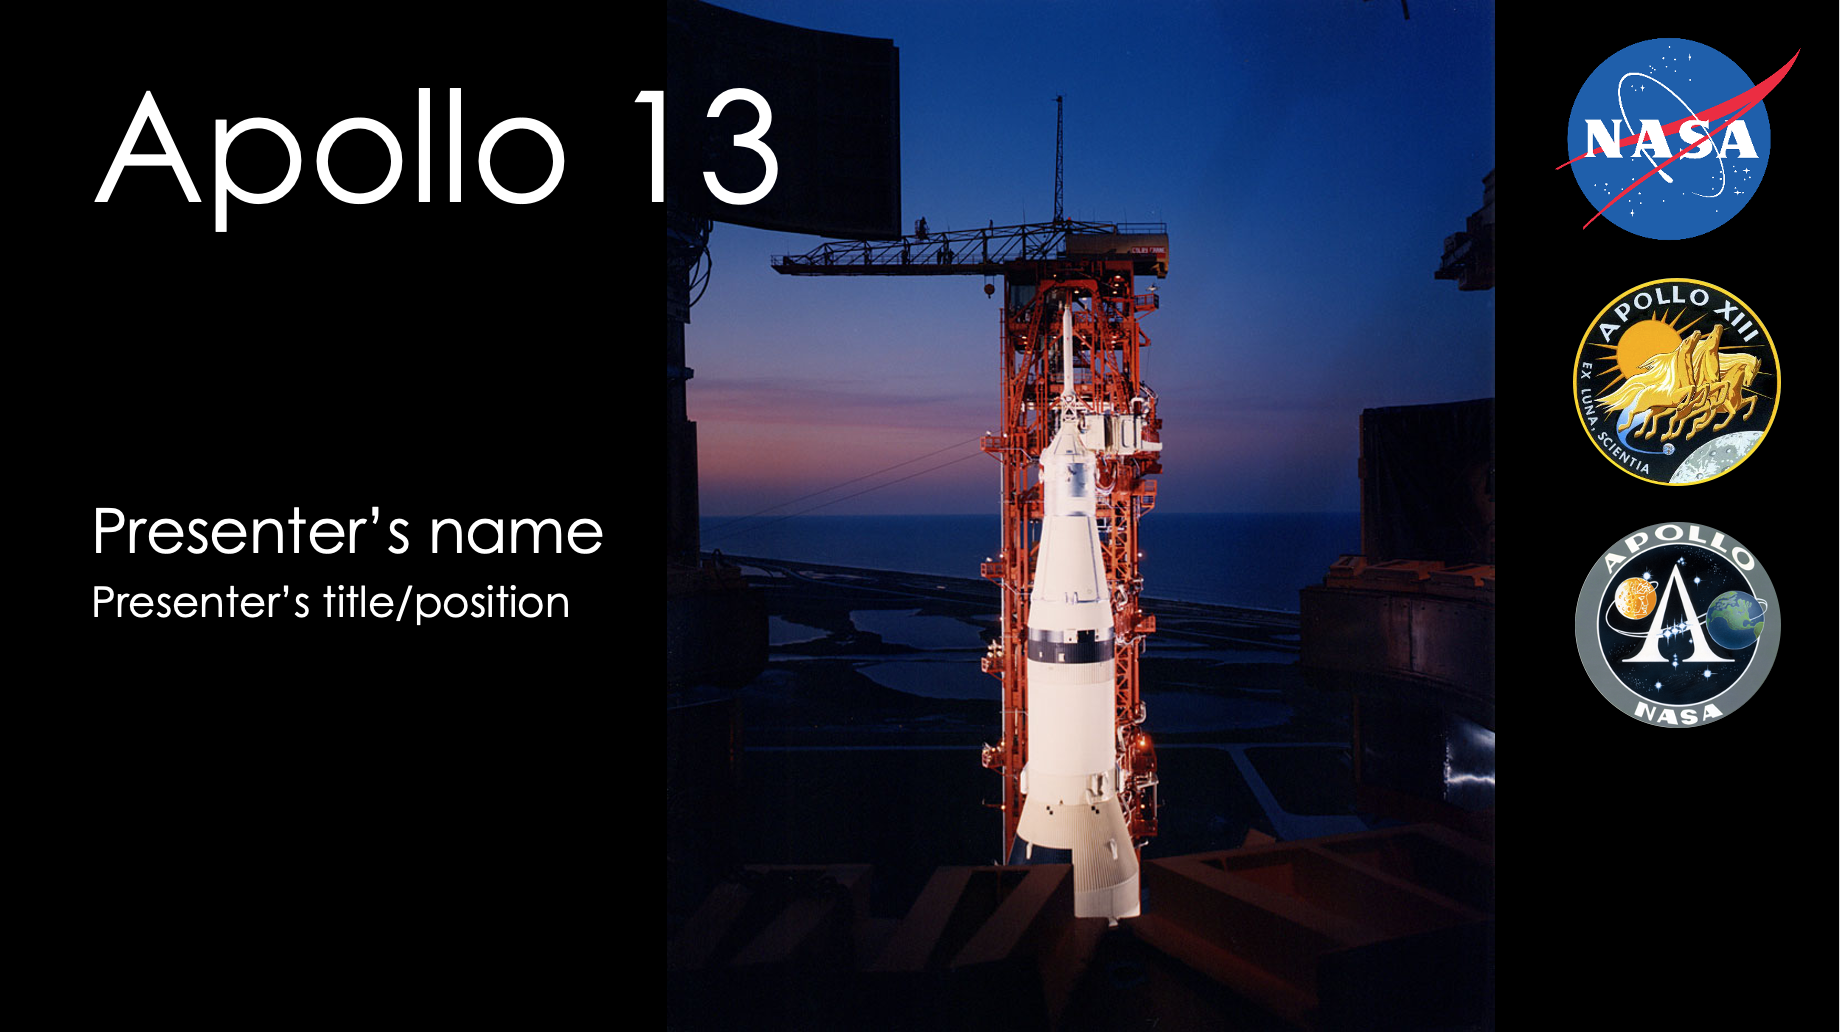 Cover slide with text: "Apollo 13, presenter's name, presenter's title/position", image of a rocket on a launchpad at under a dark blue sky with light on the horizon, and NASA logos.